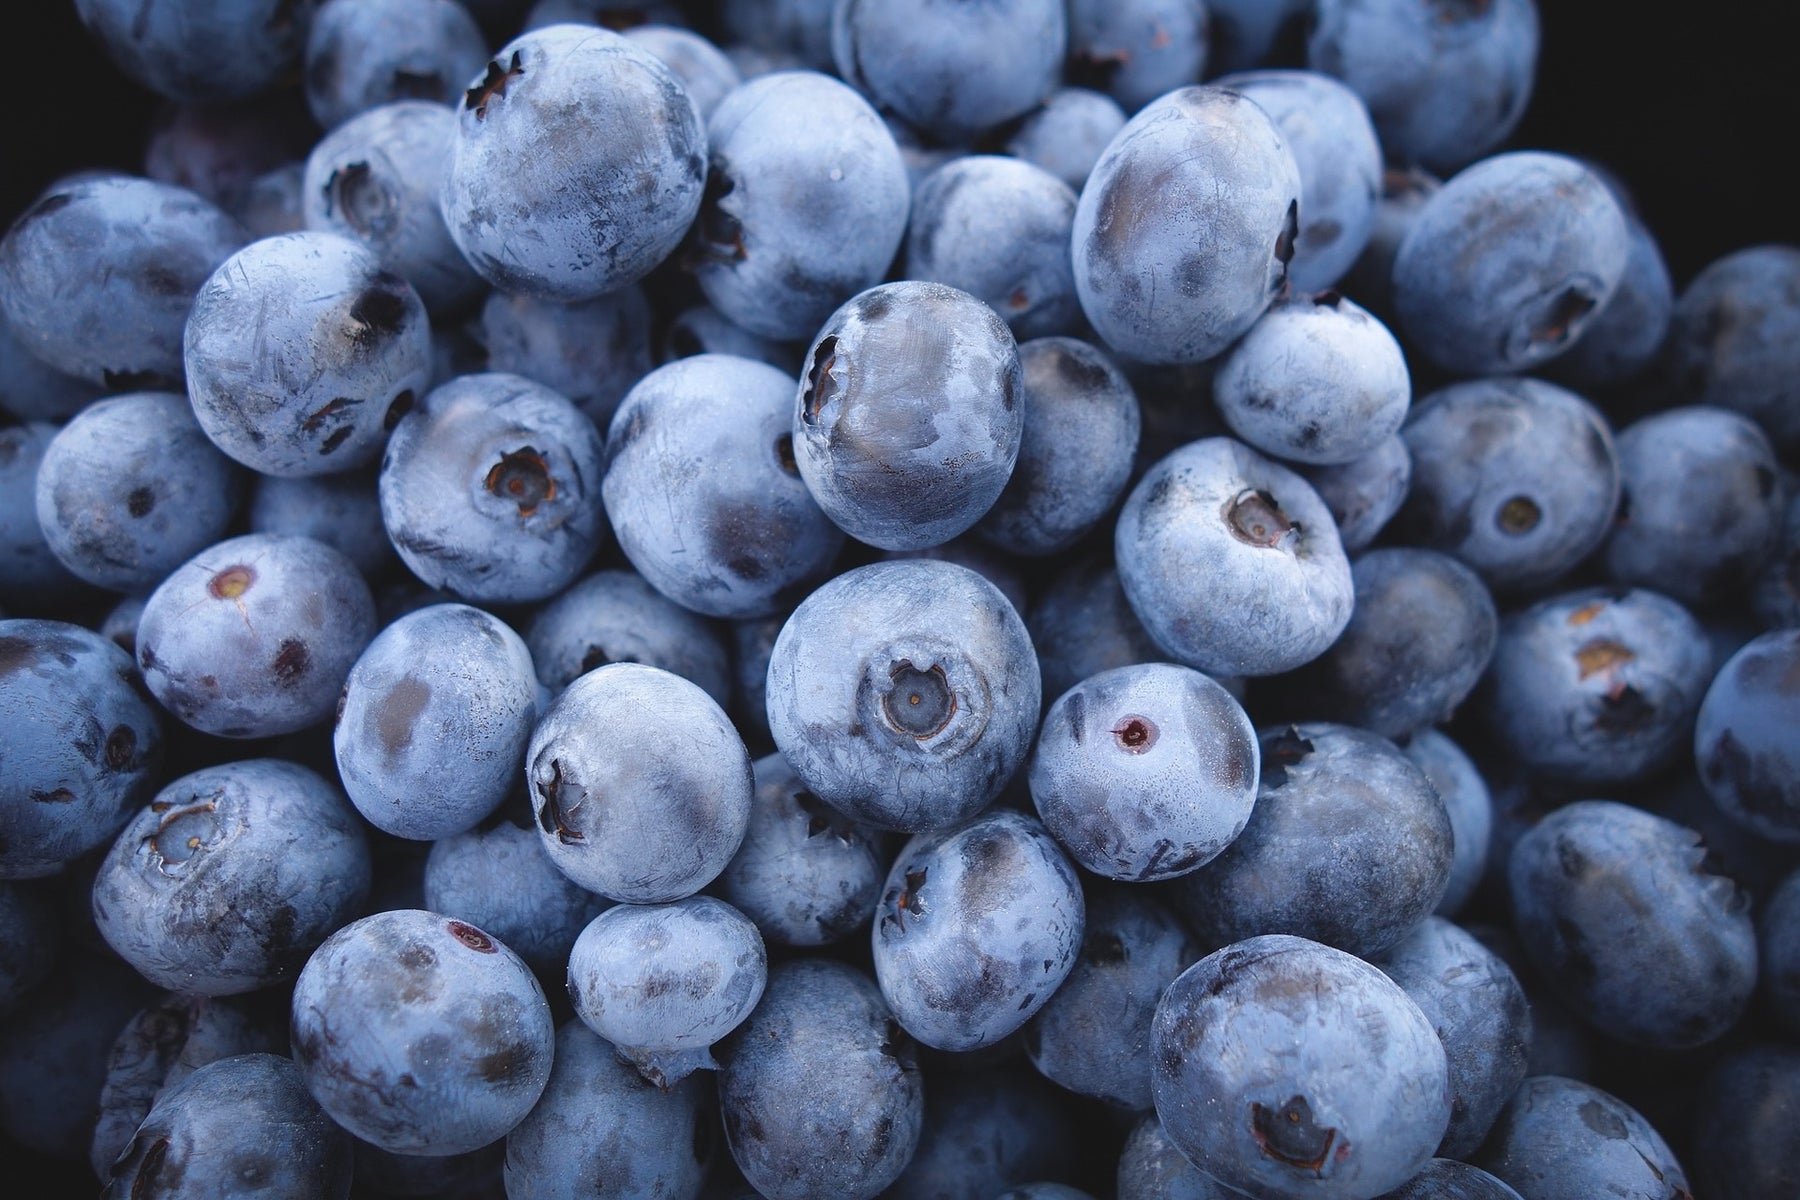 Fresh blueberries piled together